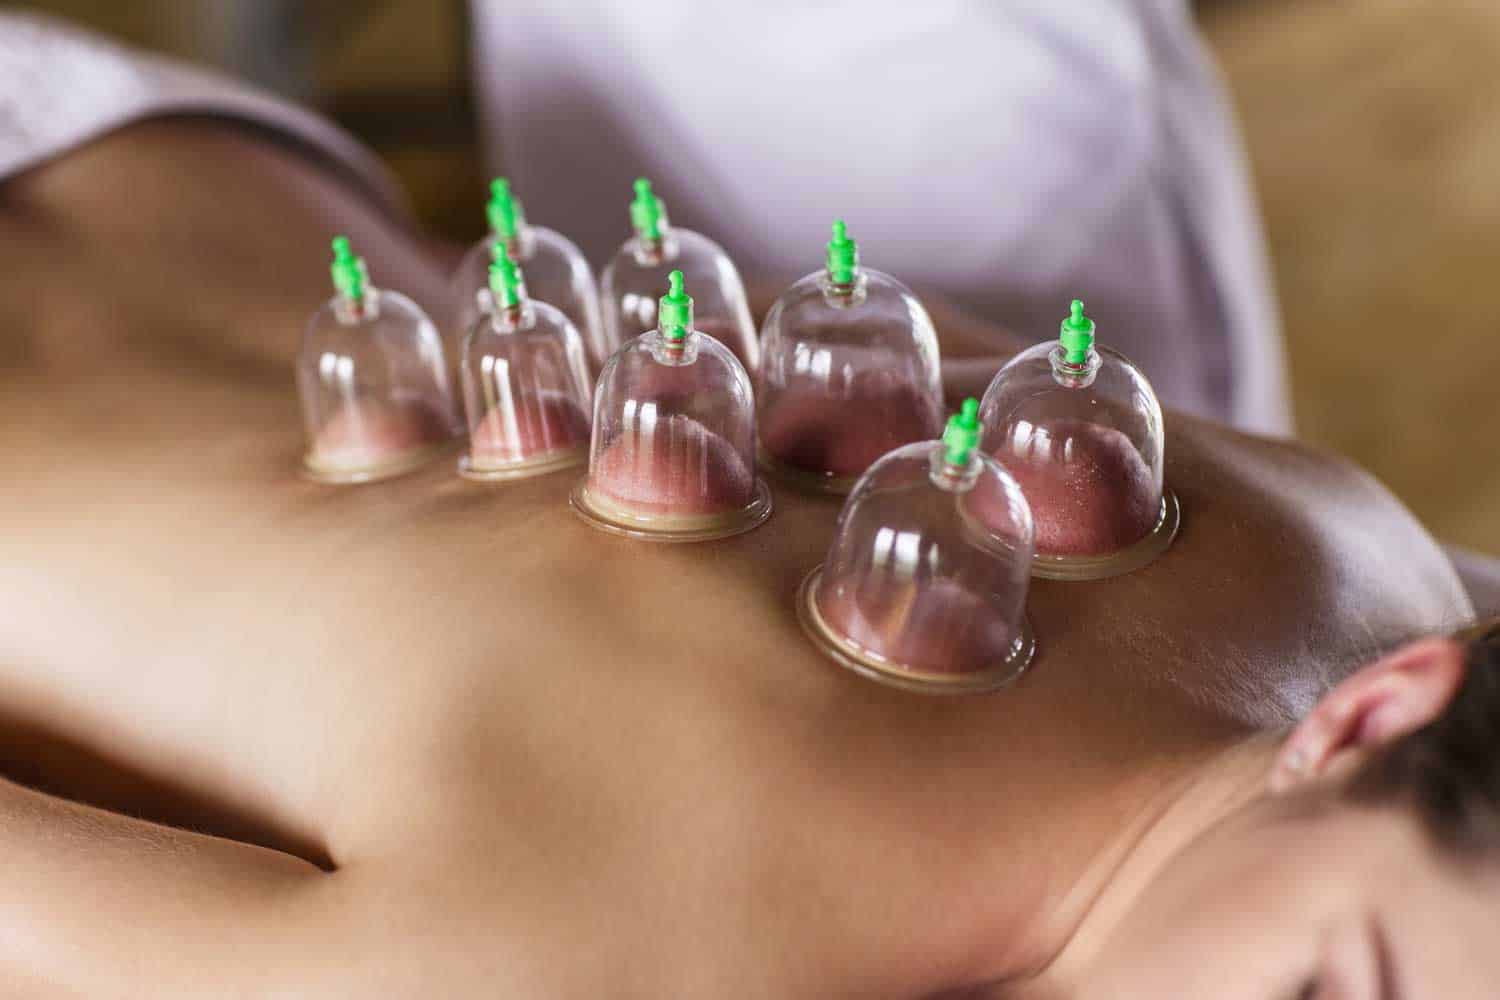 The benefits of cupping